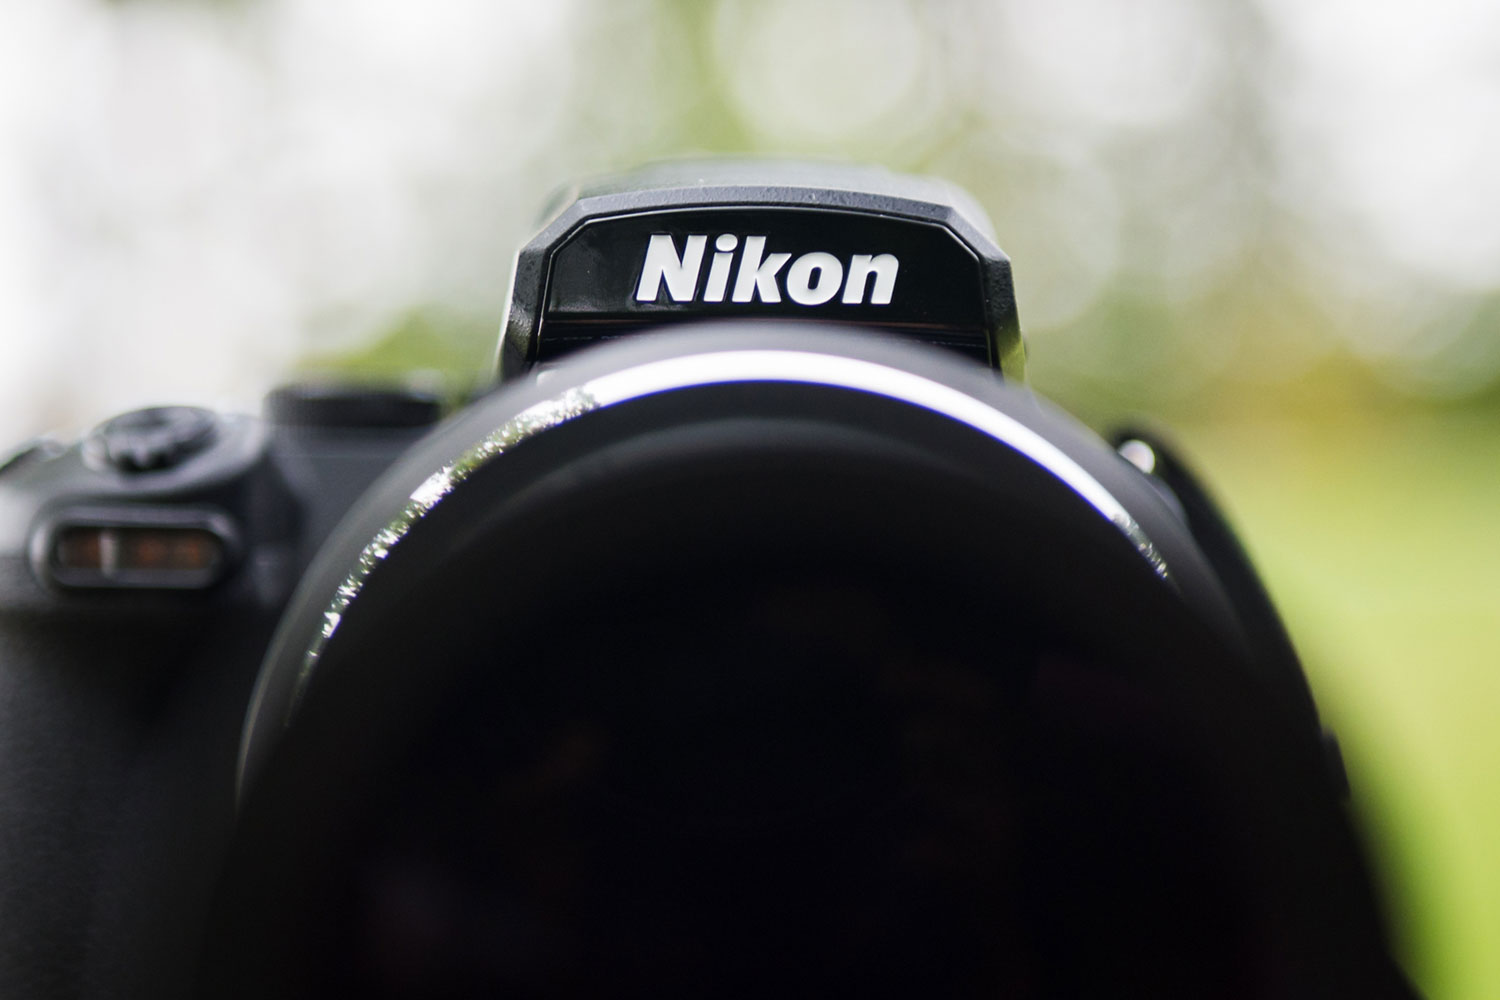 Nikon D5300 review: Approachable, yet serious: Digital Photography Review